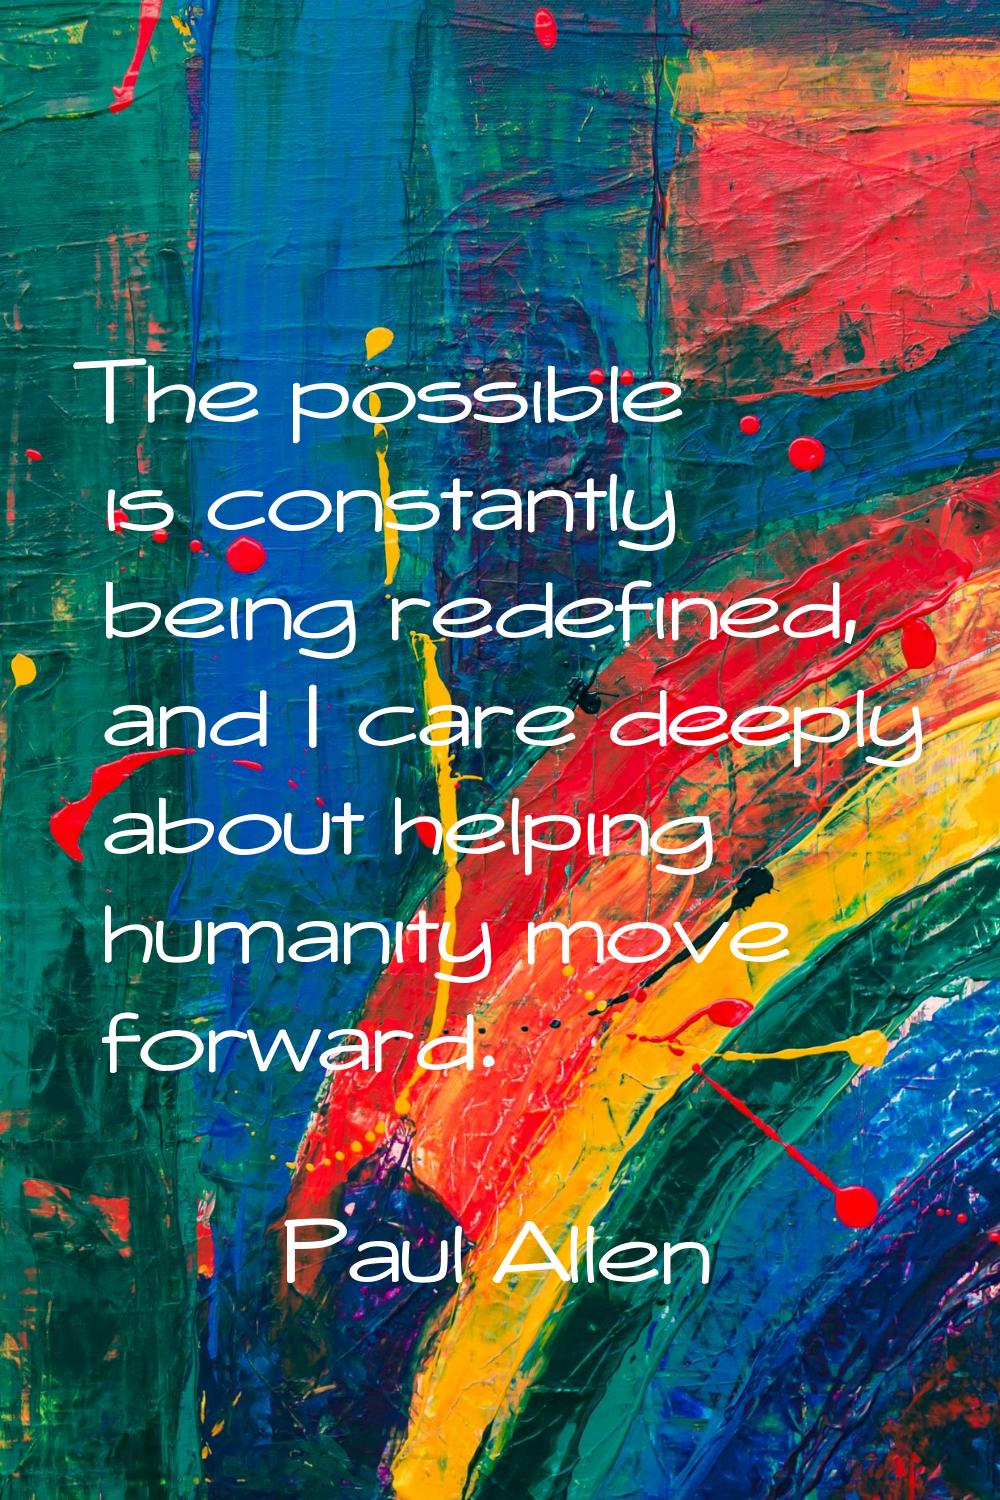 The possible is constantly being redefined, and I care deeply about helping humanity move forward.